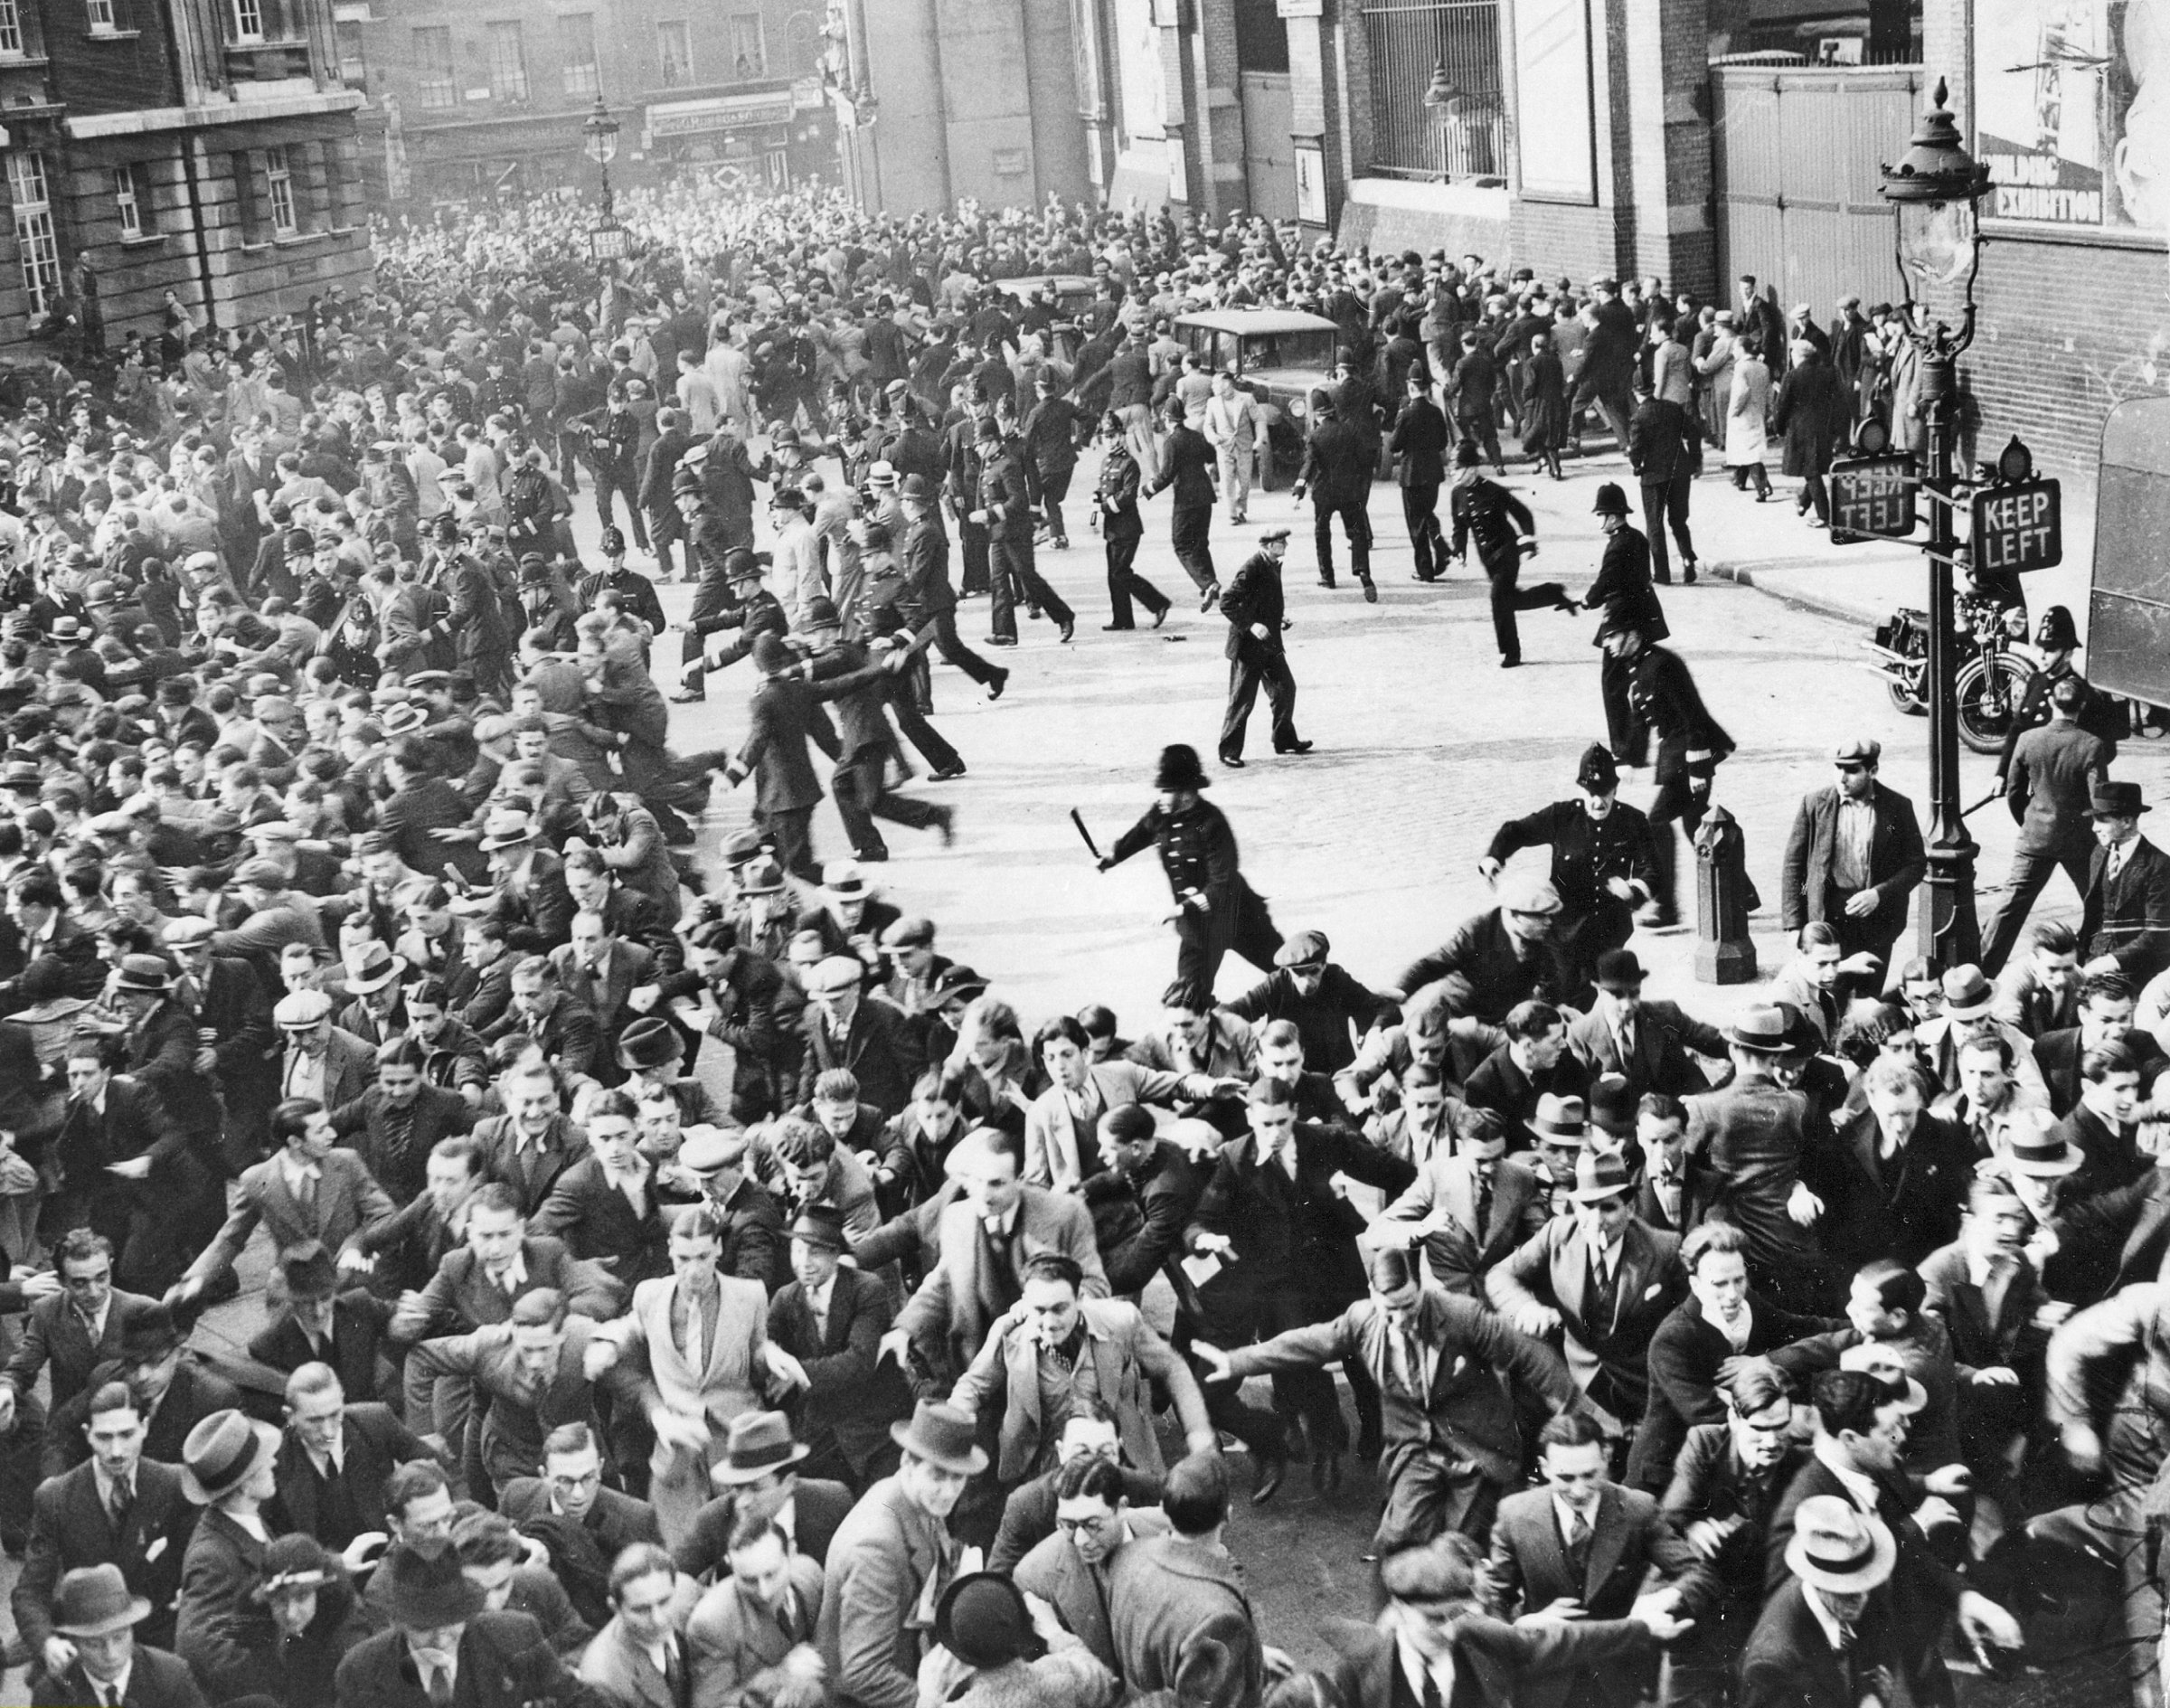 Riots erupted between anti-Fascists and Blackshirts (British Fascists) when Mosley's supporters were gathering in Great Mint Street for a march through the East End of London in what is now called the Battle of Cable Street on Oct. 4 1936.